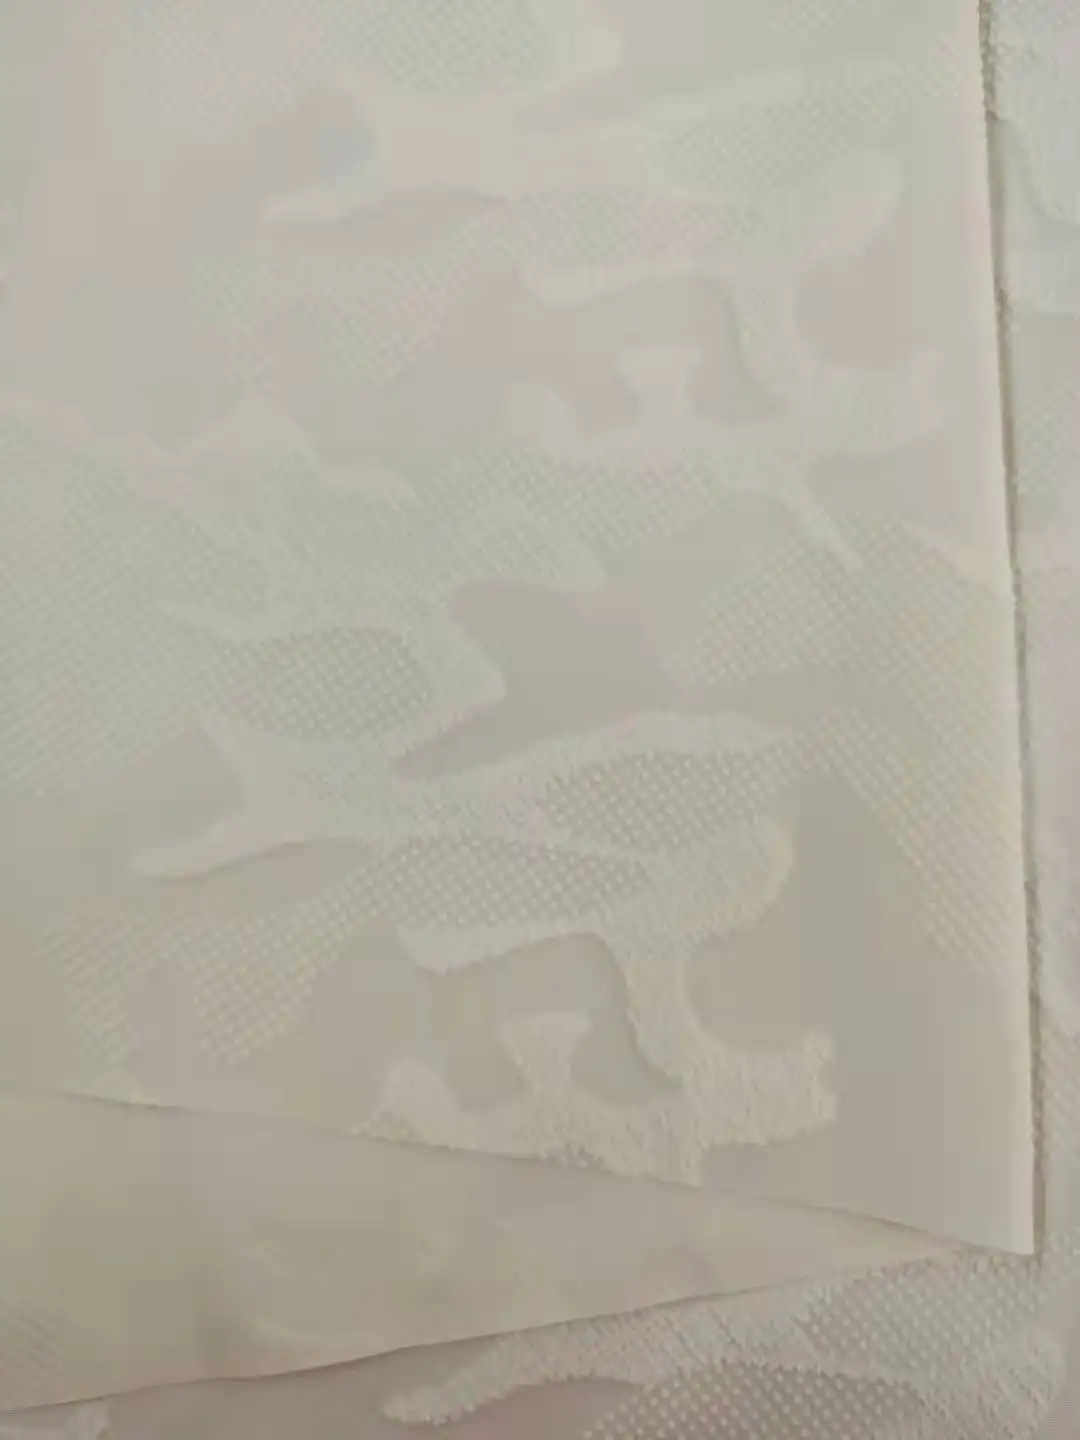 
Three dimensional relief fabric forclothing down garment 